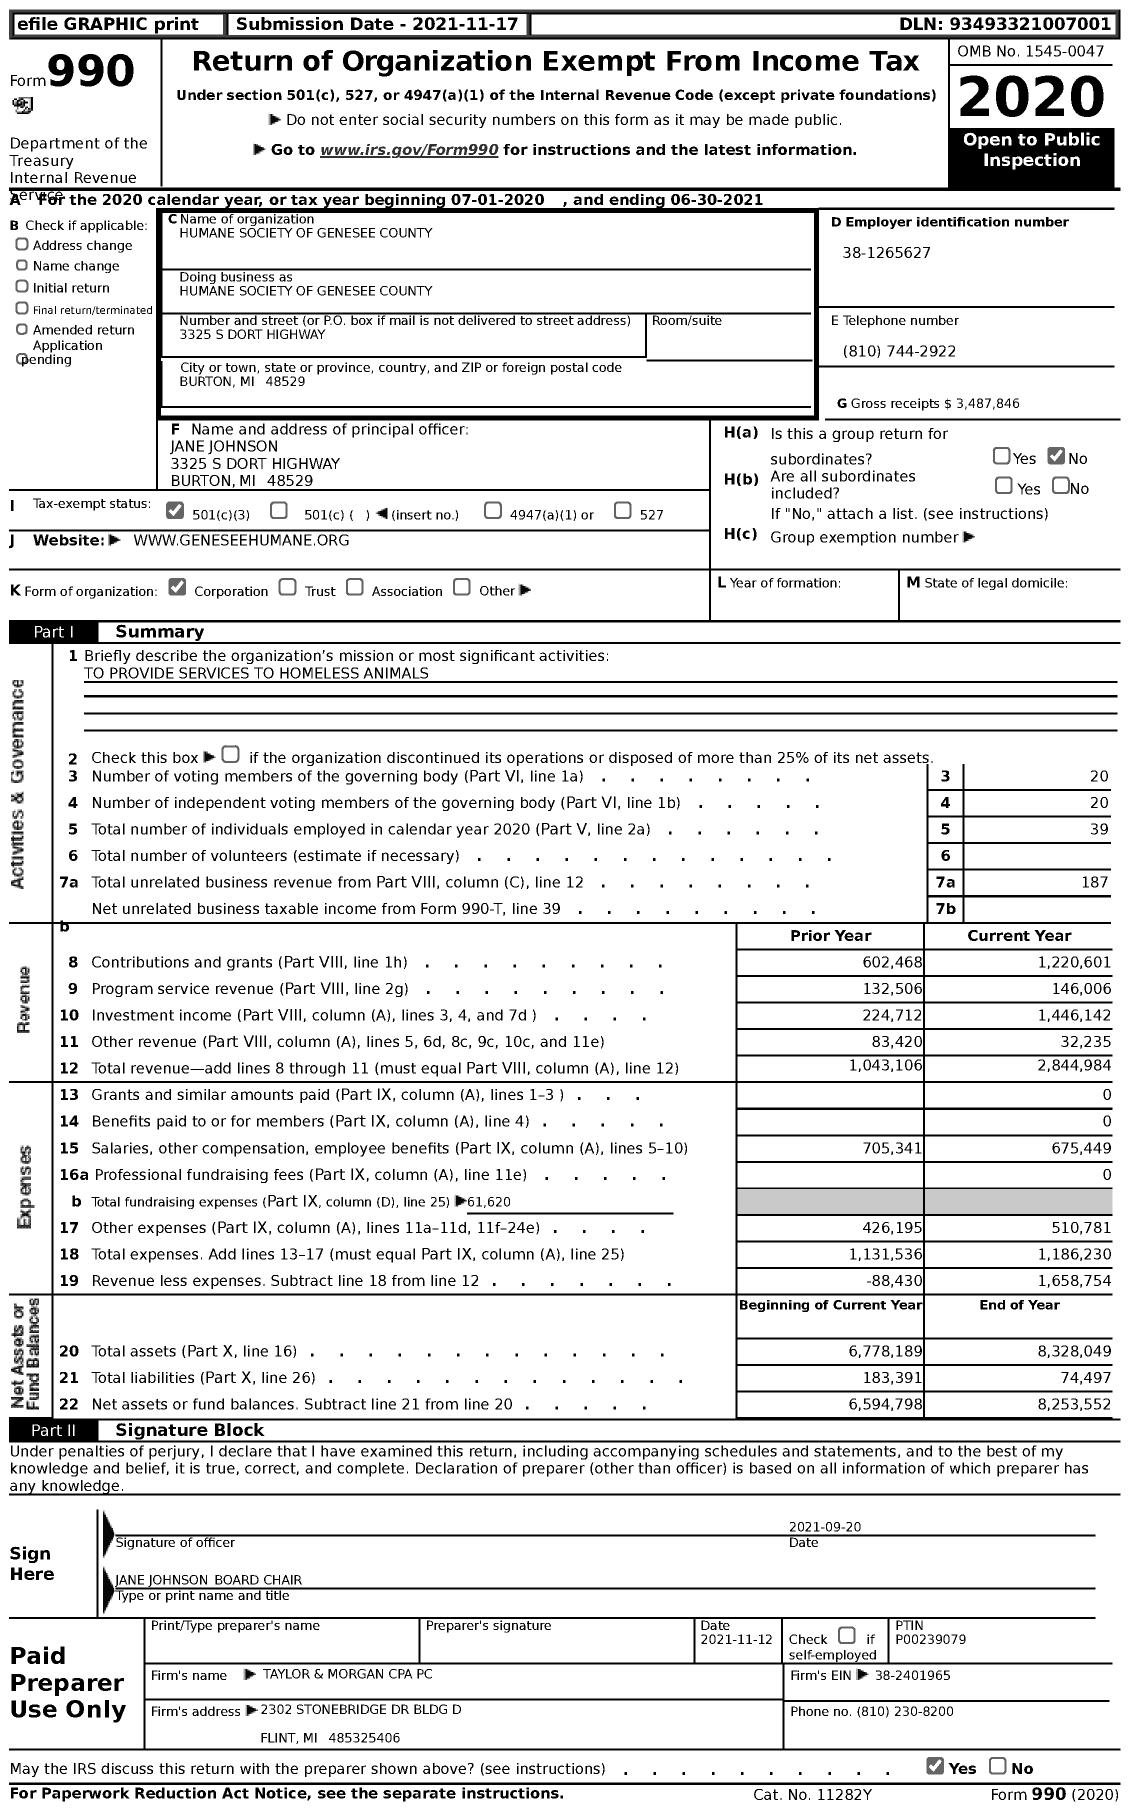 Image of first page of 2020 Form 990 for Humane Society of Genesee County (HSGC)